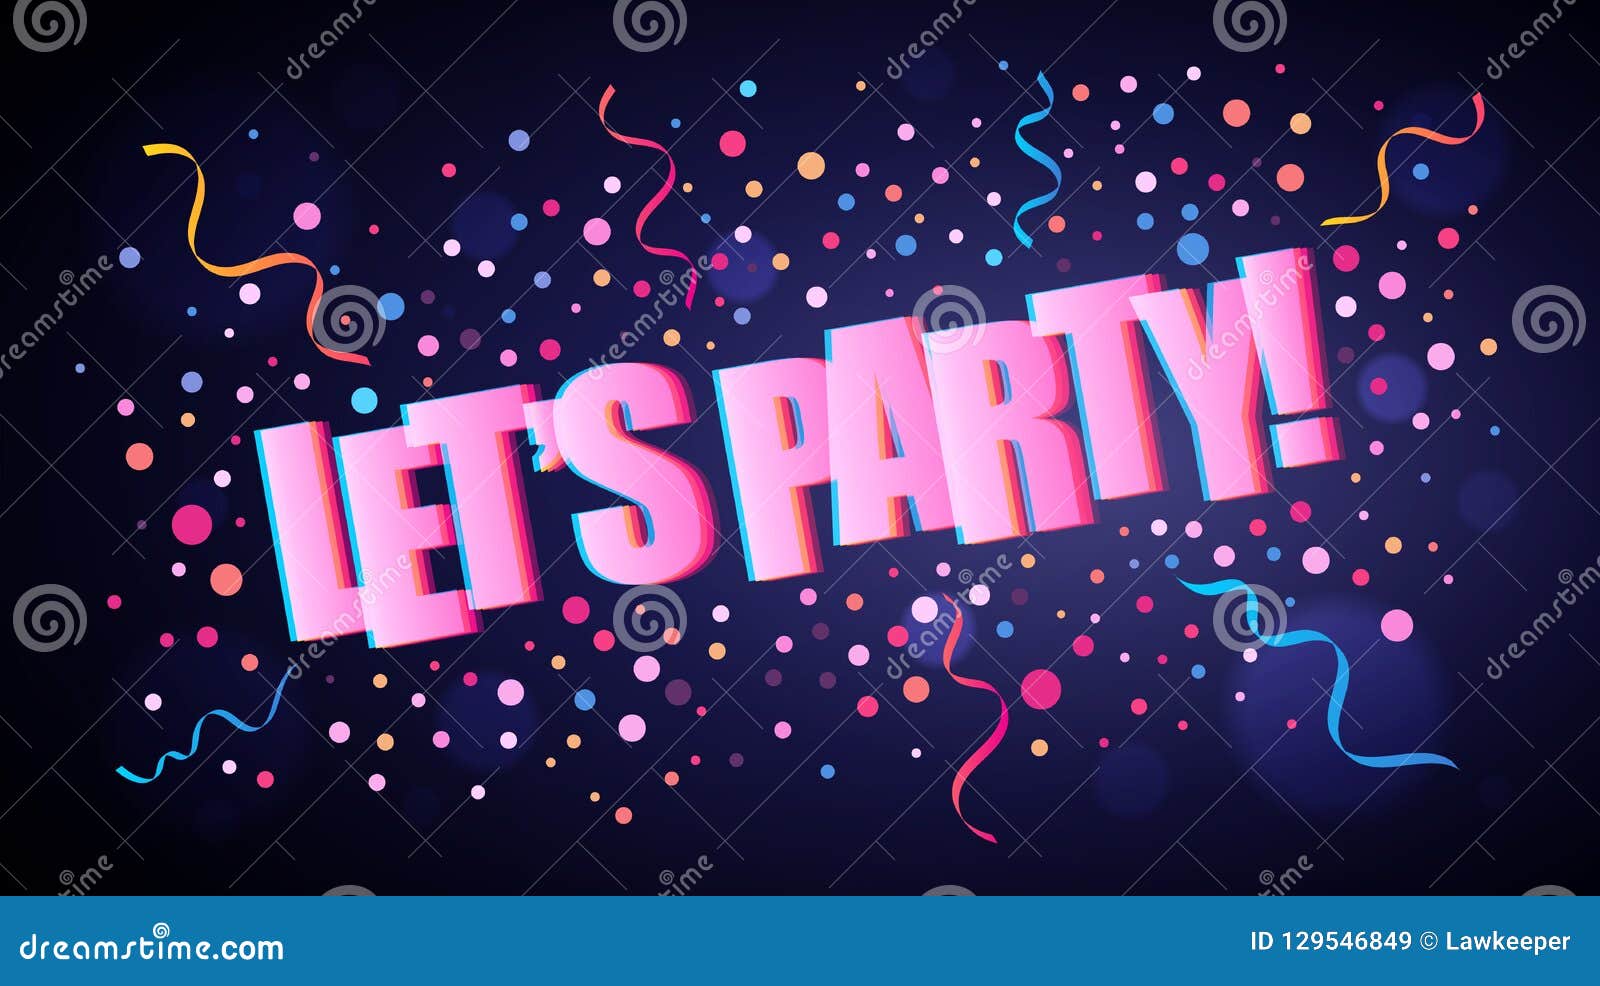 Lets Party Free Vector Art - (12 Free Downloads)